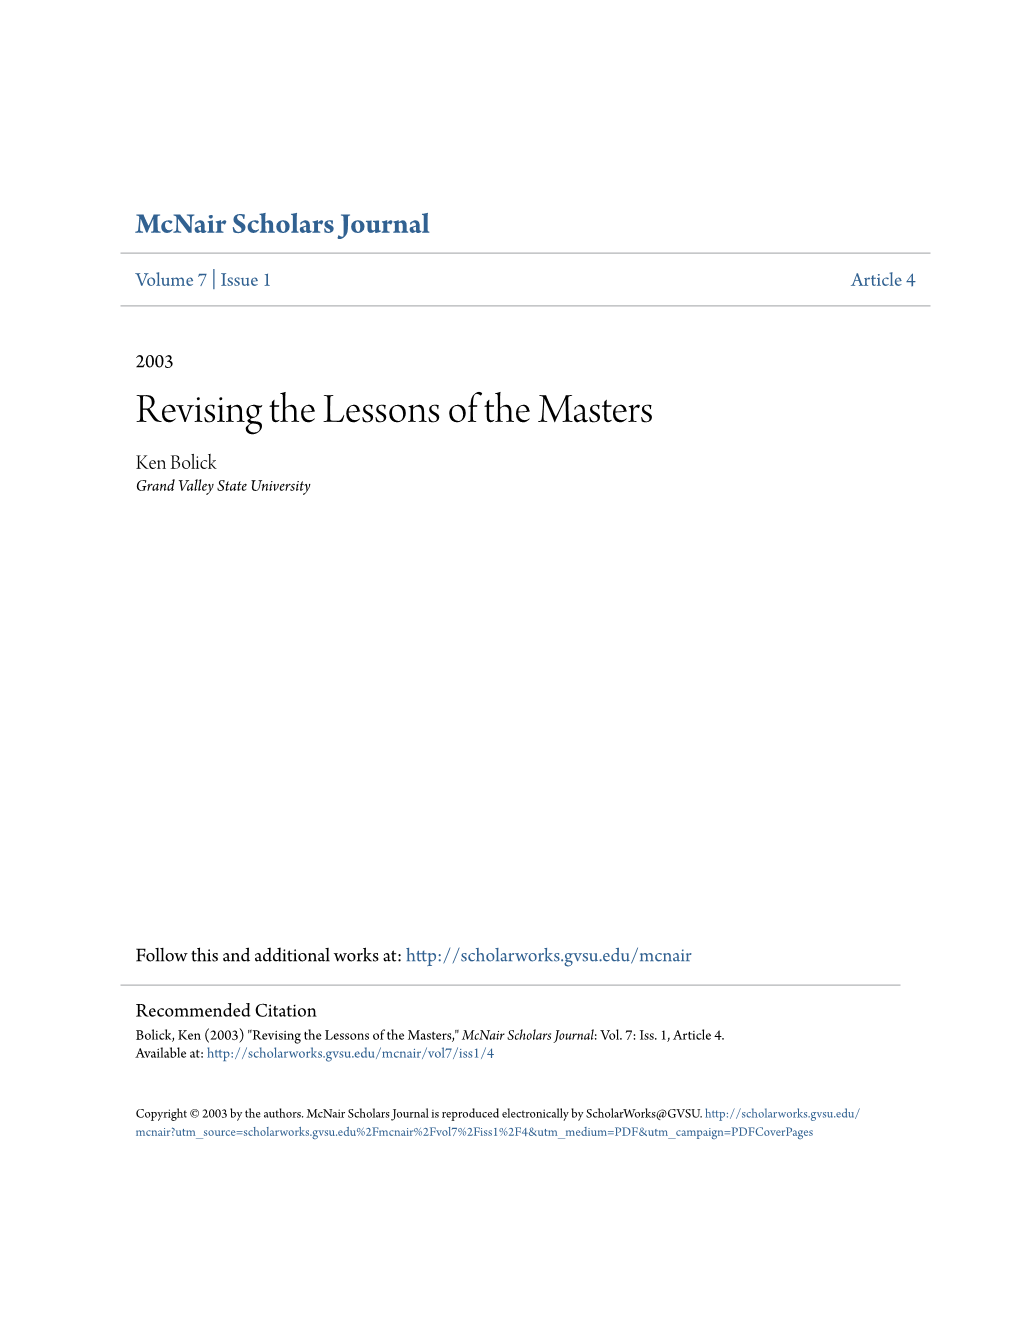 Revising the Lessons of the Masters Ken Bolick Grand Valley State University